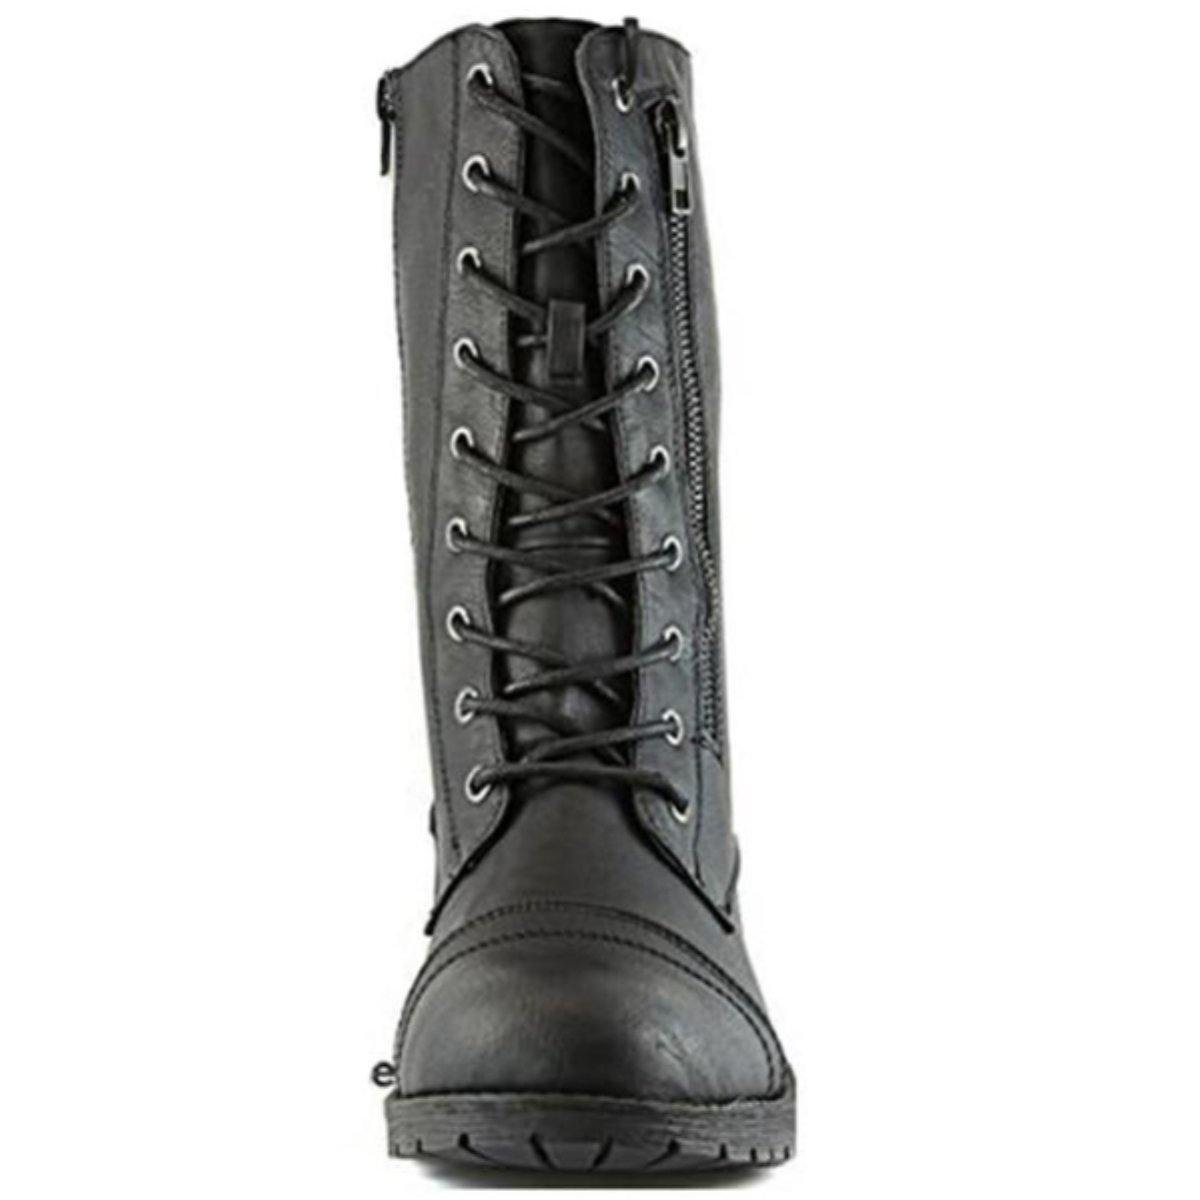 High Quality Pocket Boots - American Legend Rider